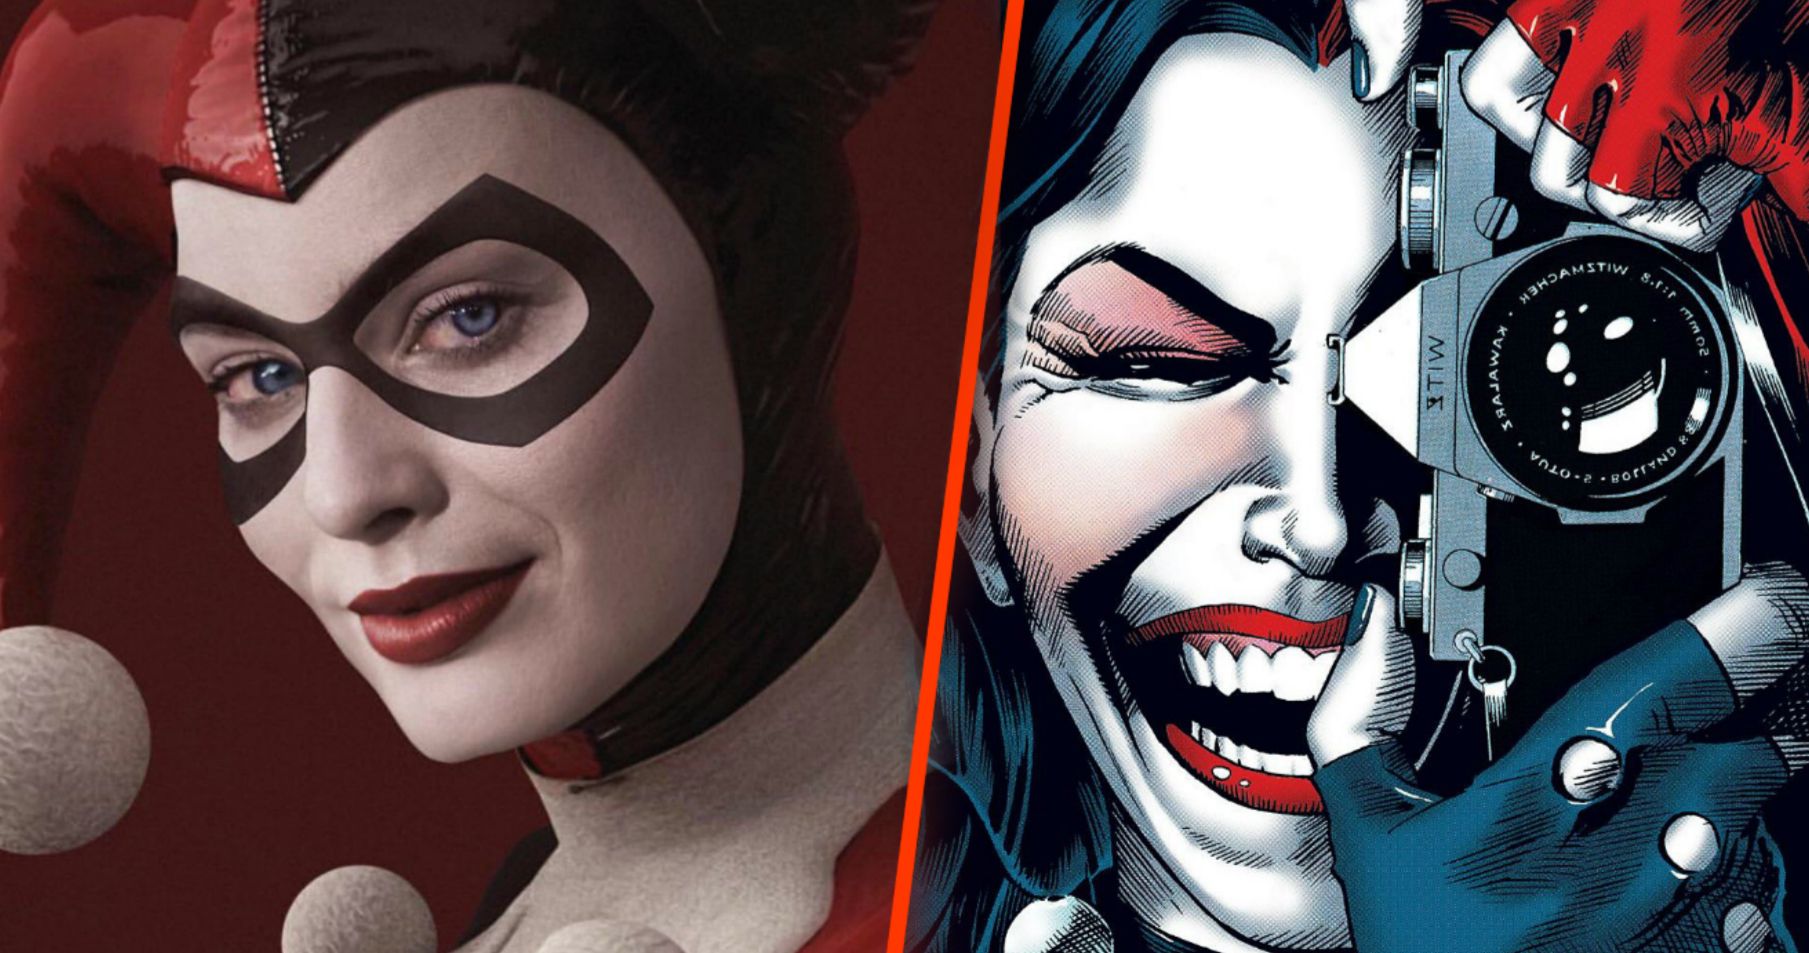 James Gunn's Take on Harley Quinn in Suicide Squad 2 Should Please DC Comics Fans